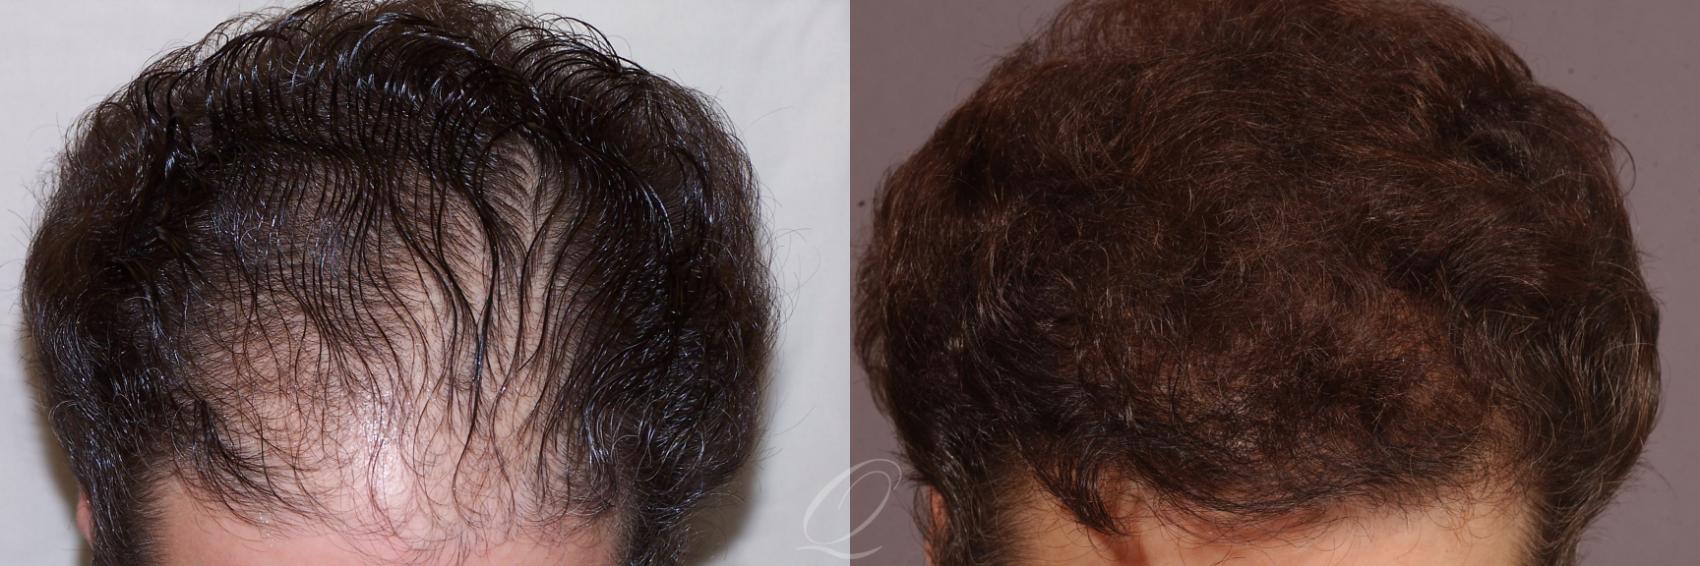 FUT Case 1049 Before & After View #1 | Rochester, Buffalo, & Syracuse, NY | Quatela Center for Hair Restoration